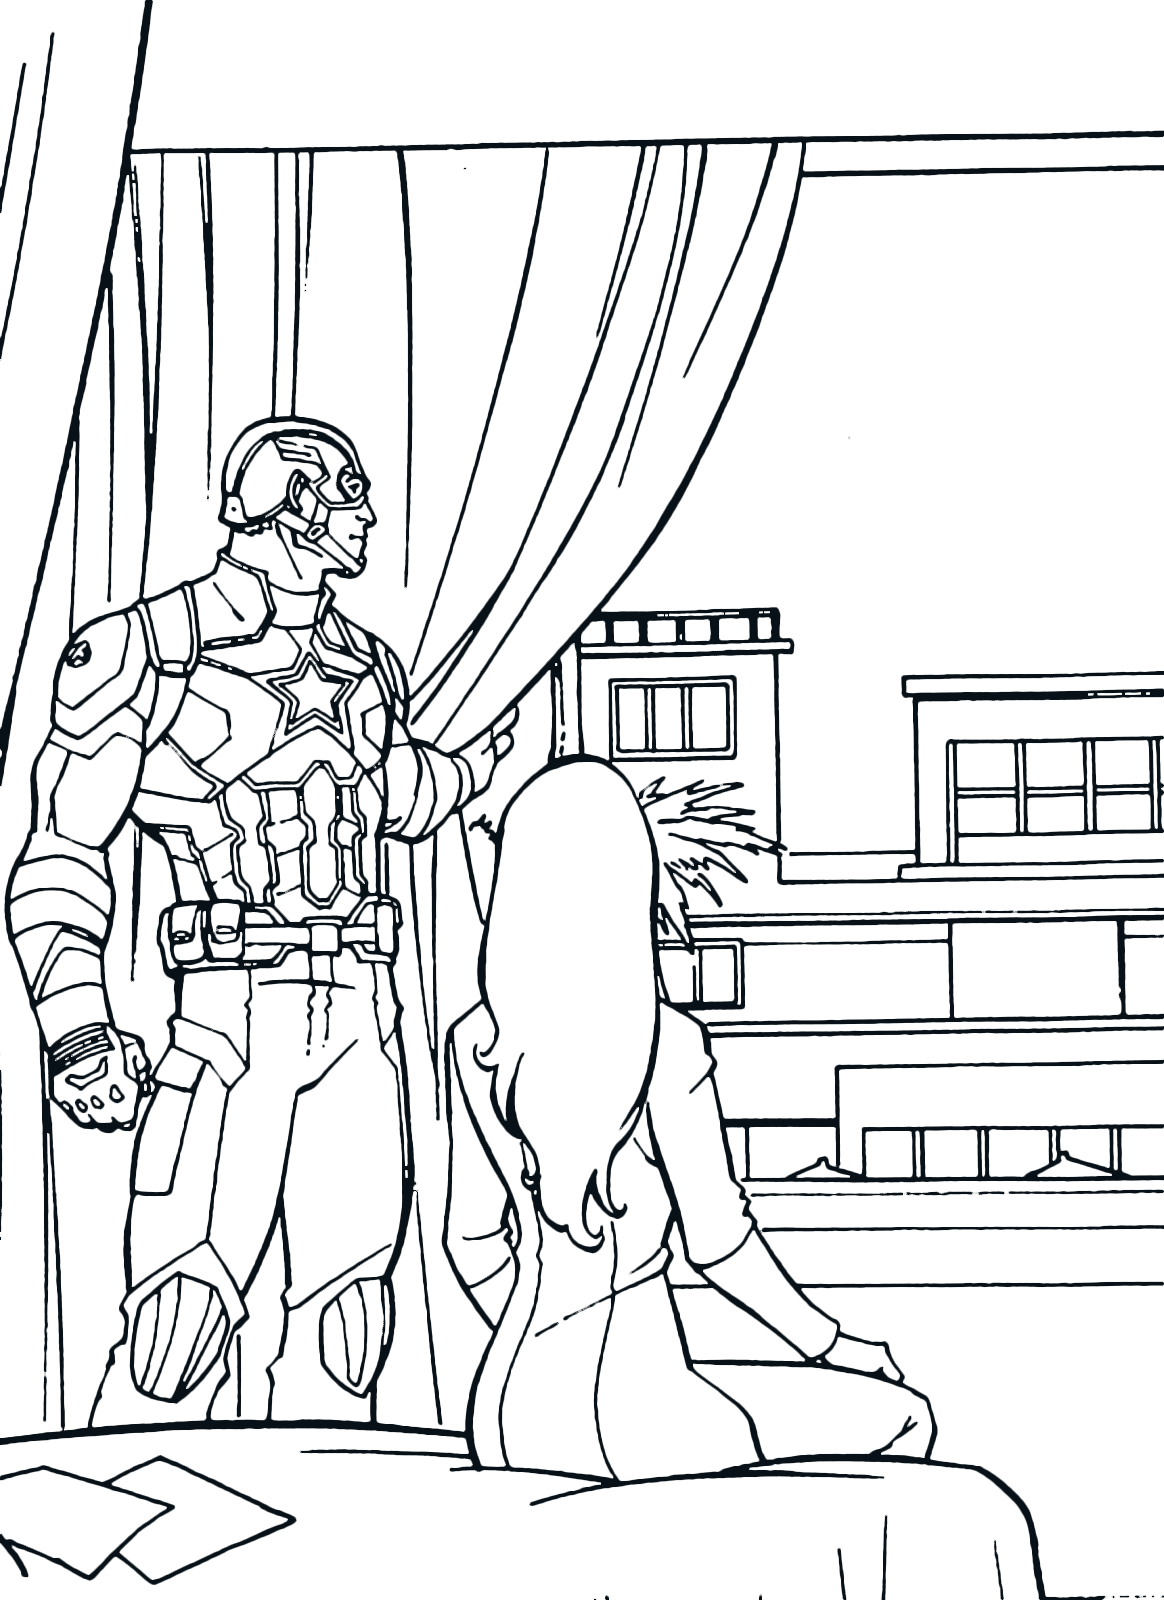 Captain America - Captain America and Scarlet look out of the building window